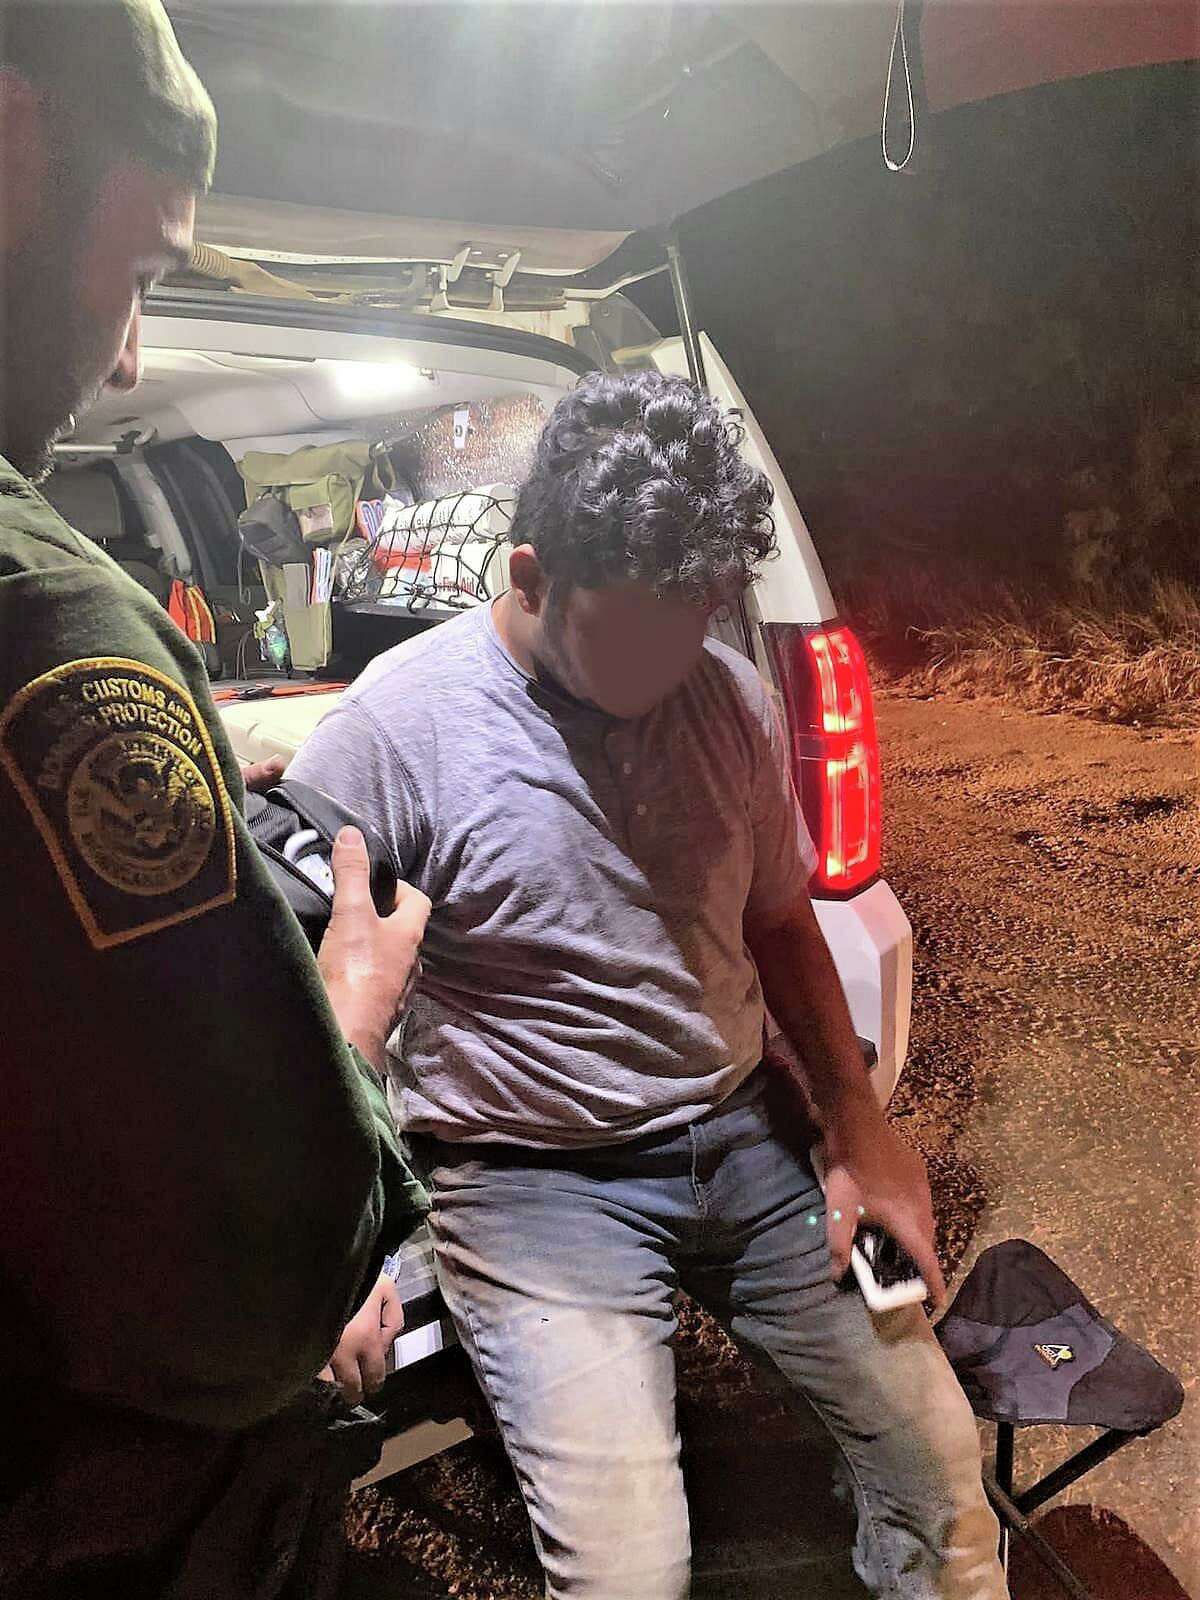 U.S. Border Patrol agents said this migrant had a sprained ankle when they rescued him. He was taken to a local hospital for further treatment.